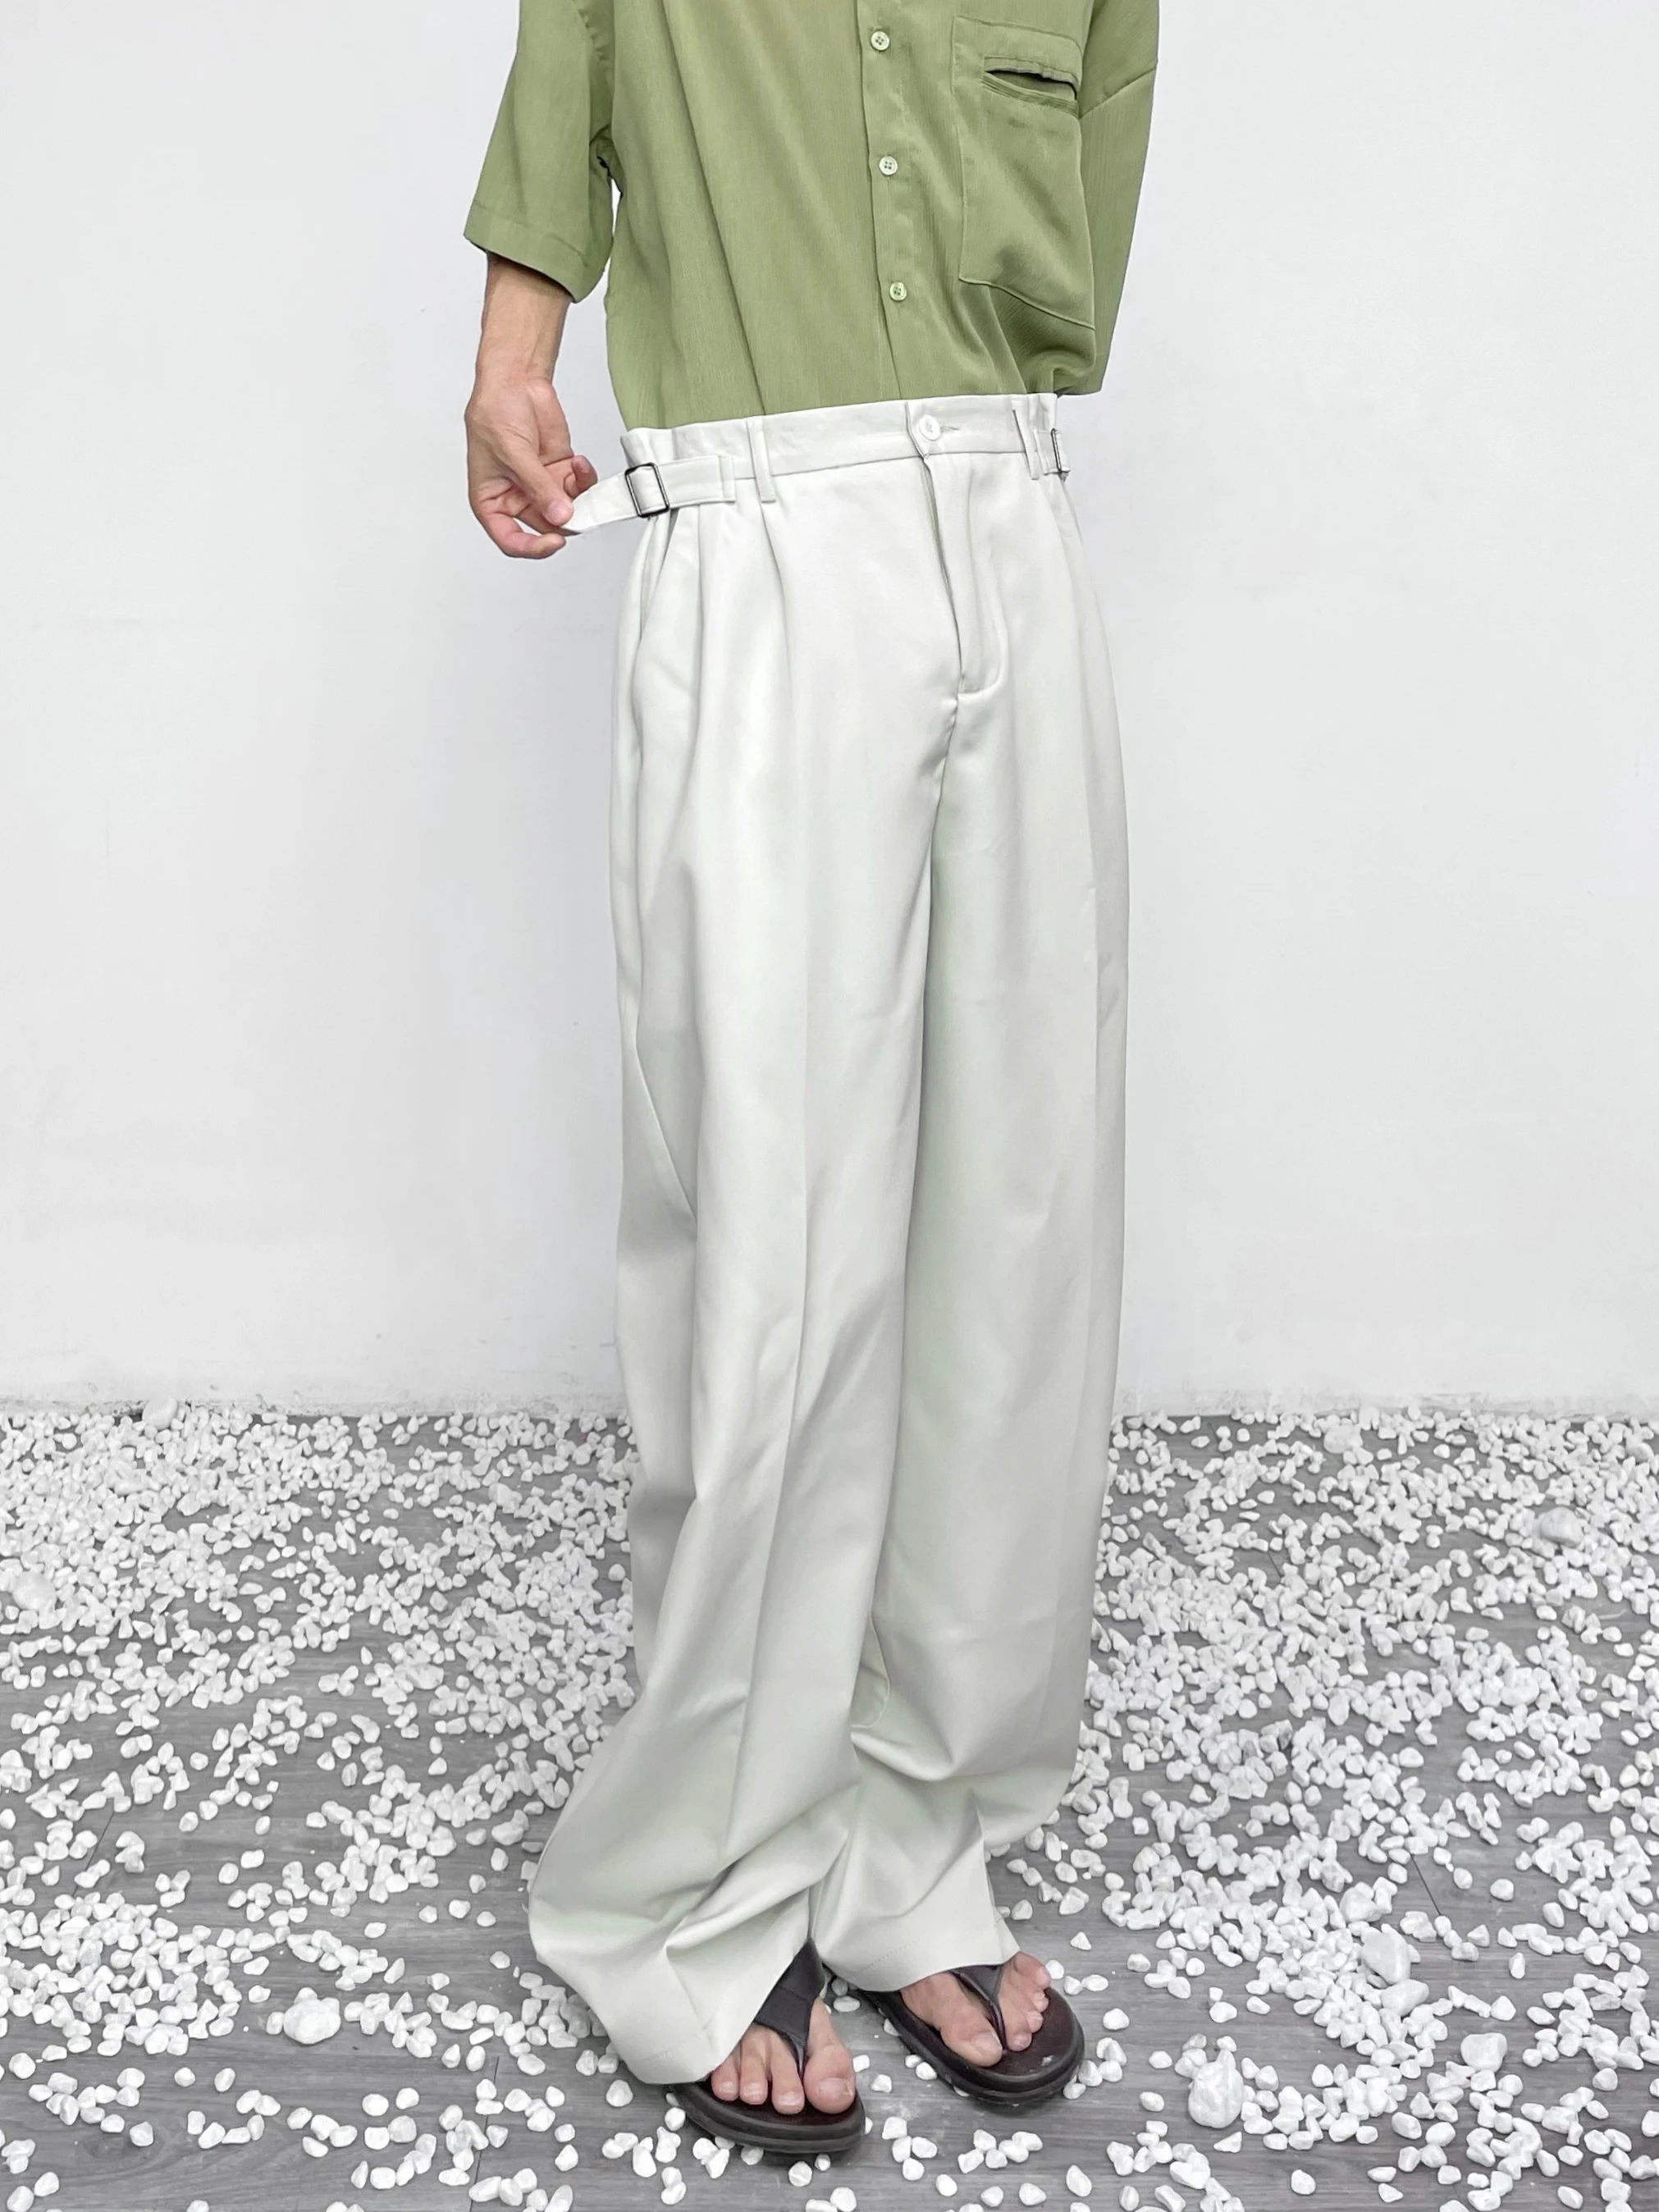 2021  New solid-color suit pants with adjustable waistbands on both sides  S-6XL!  Big yards men's pants